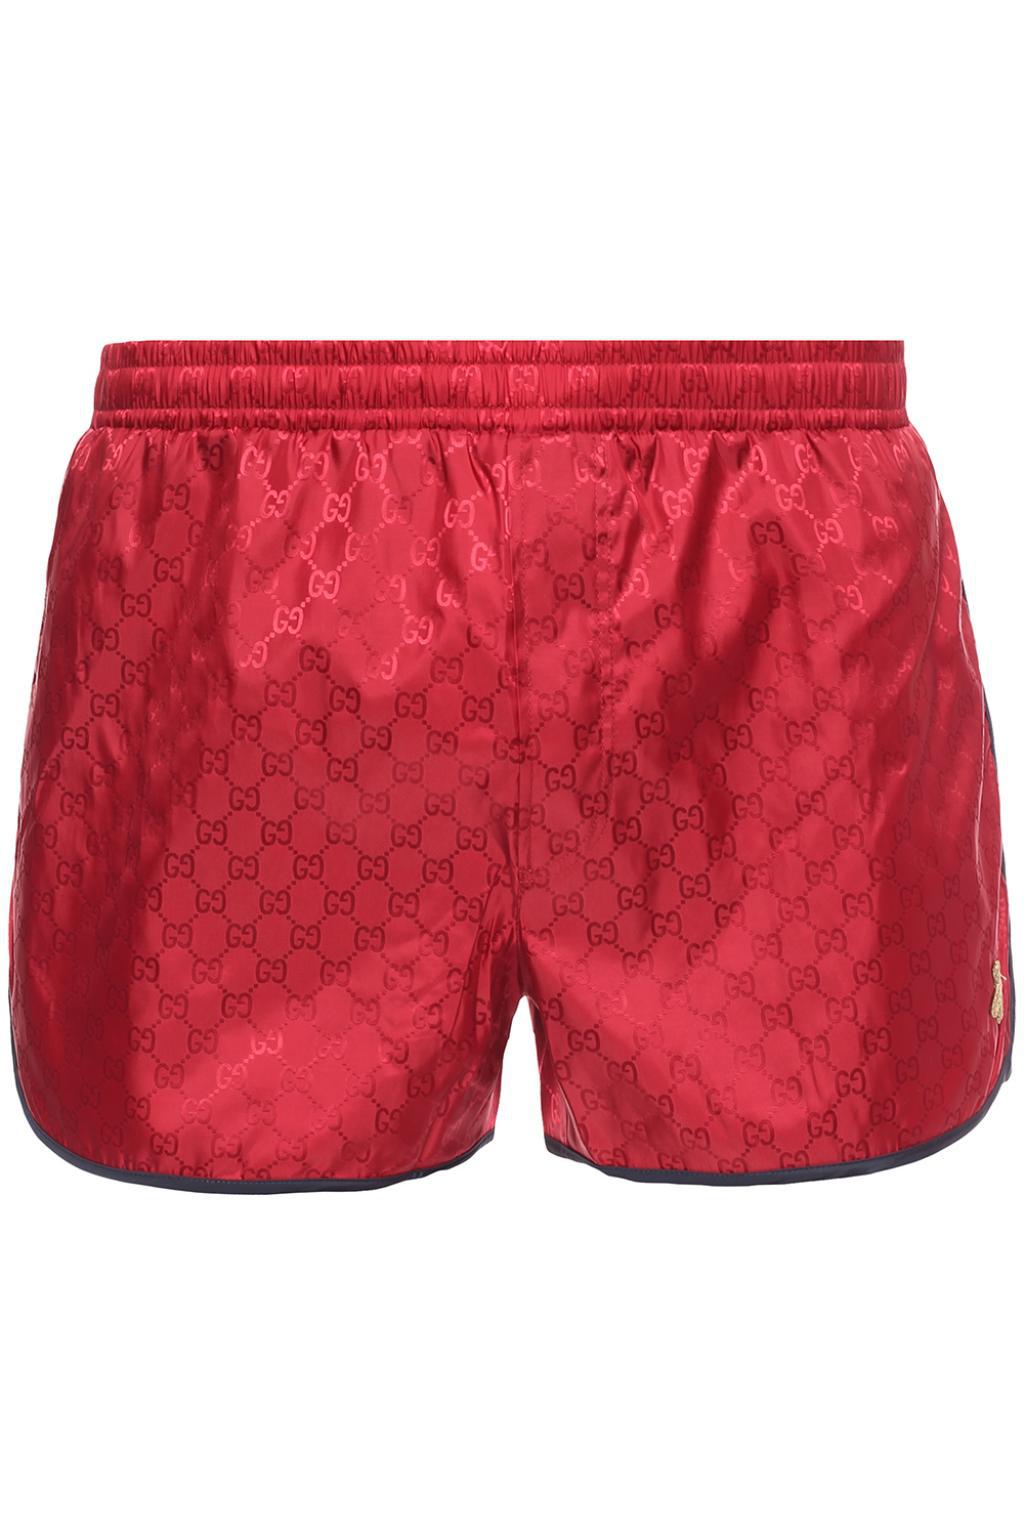 Gucci Monogram Bee Embroidery Swim Shorts in Red for Men | Lyst